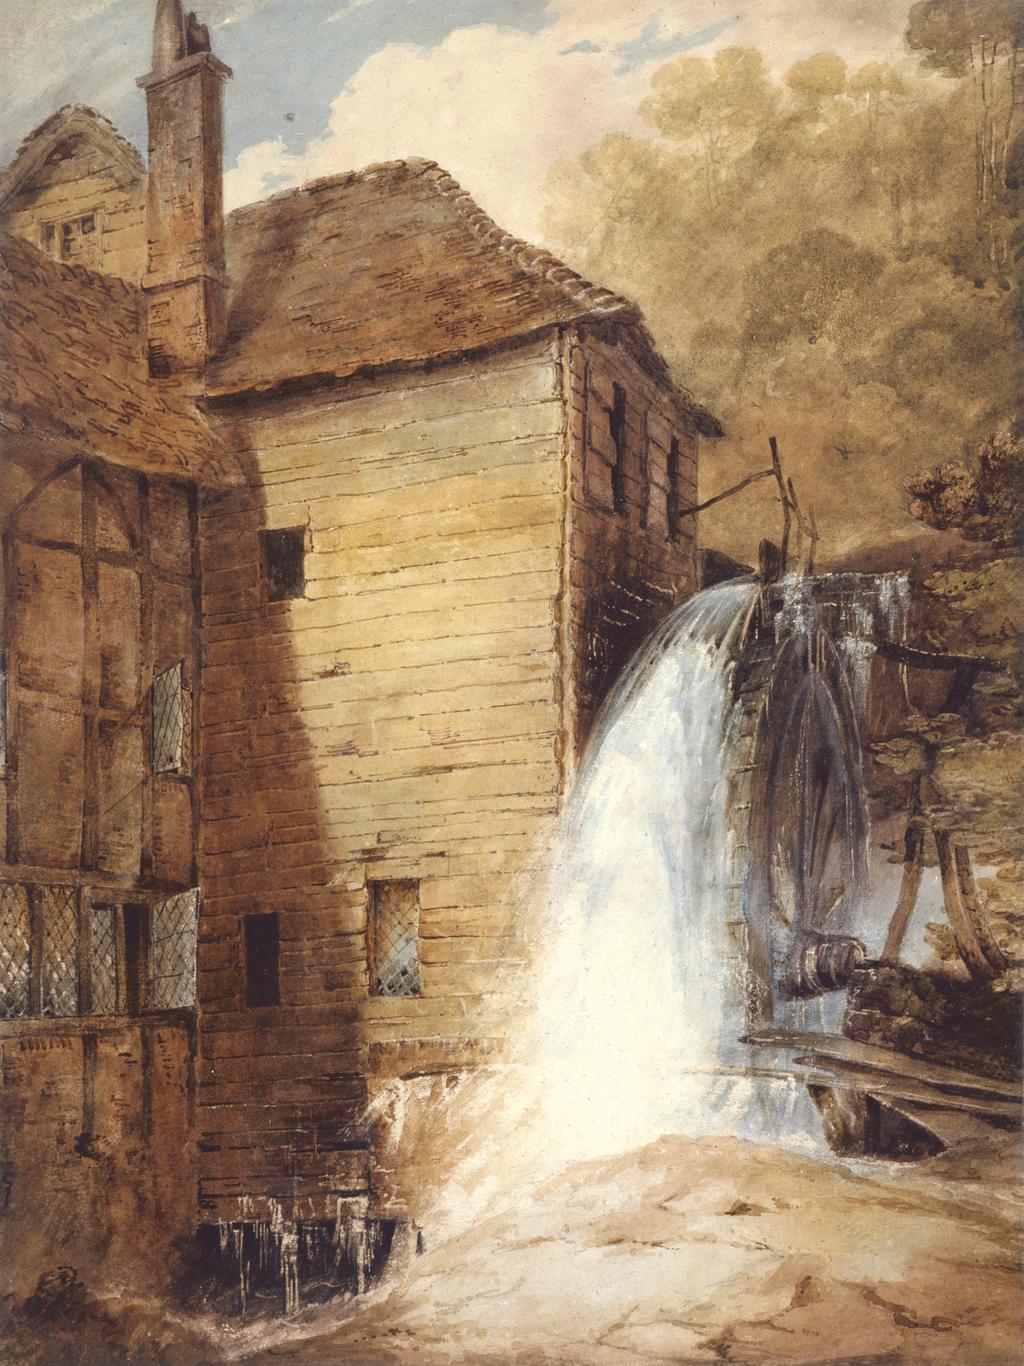 An image of An overshot Mill. Cotman, John Sell (British, 1782-1842). Watercolour over graphite on paper, height 486 mm, width 360 mm, circa 1801-1802.